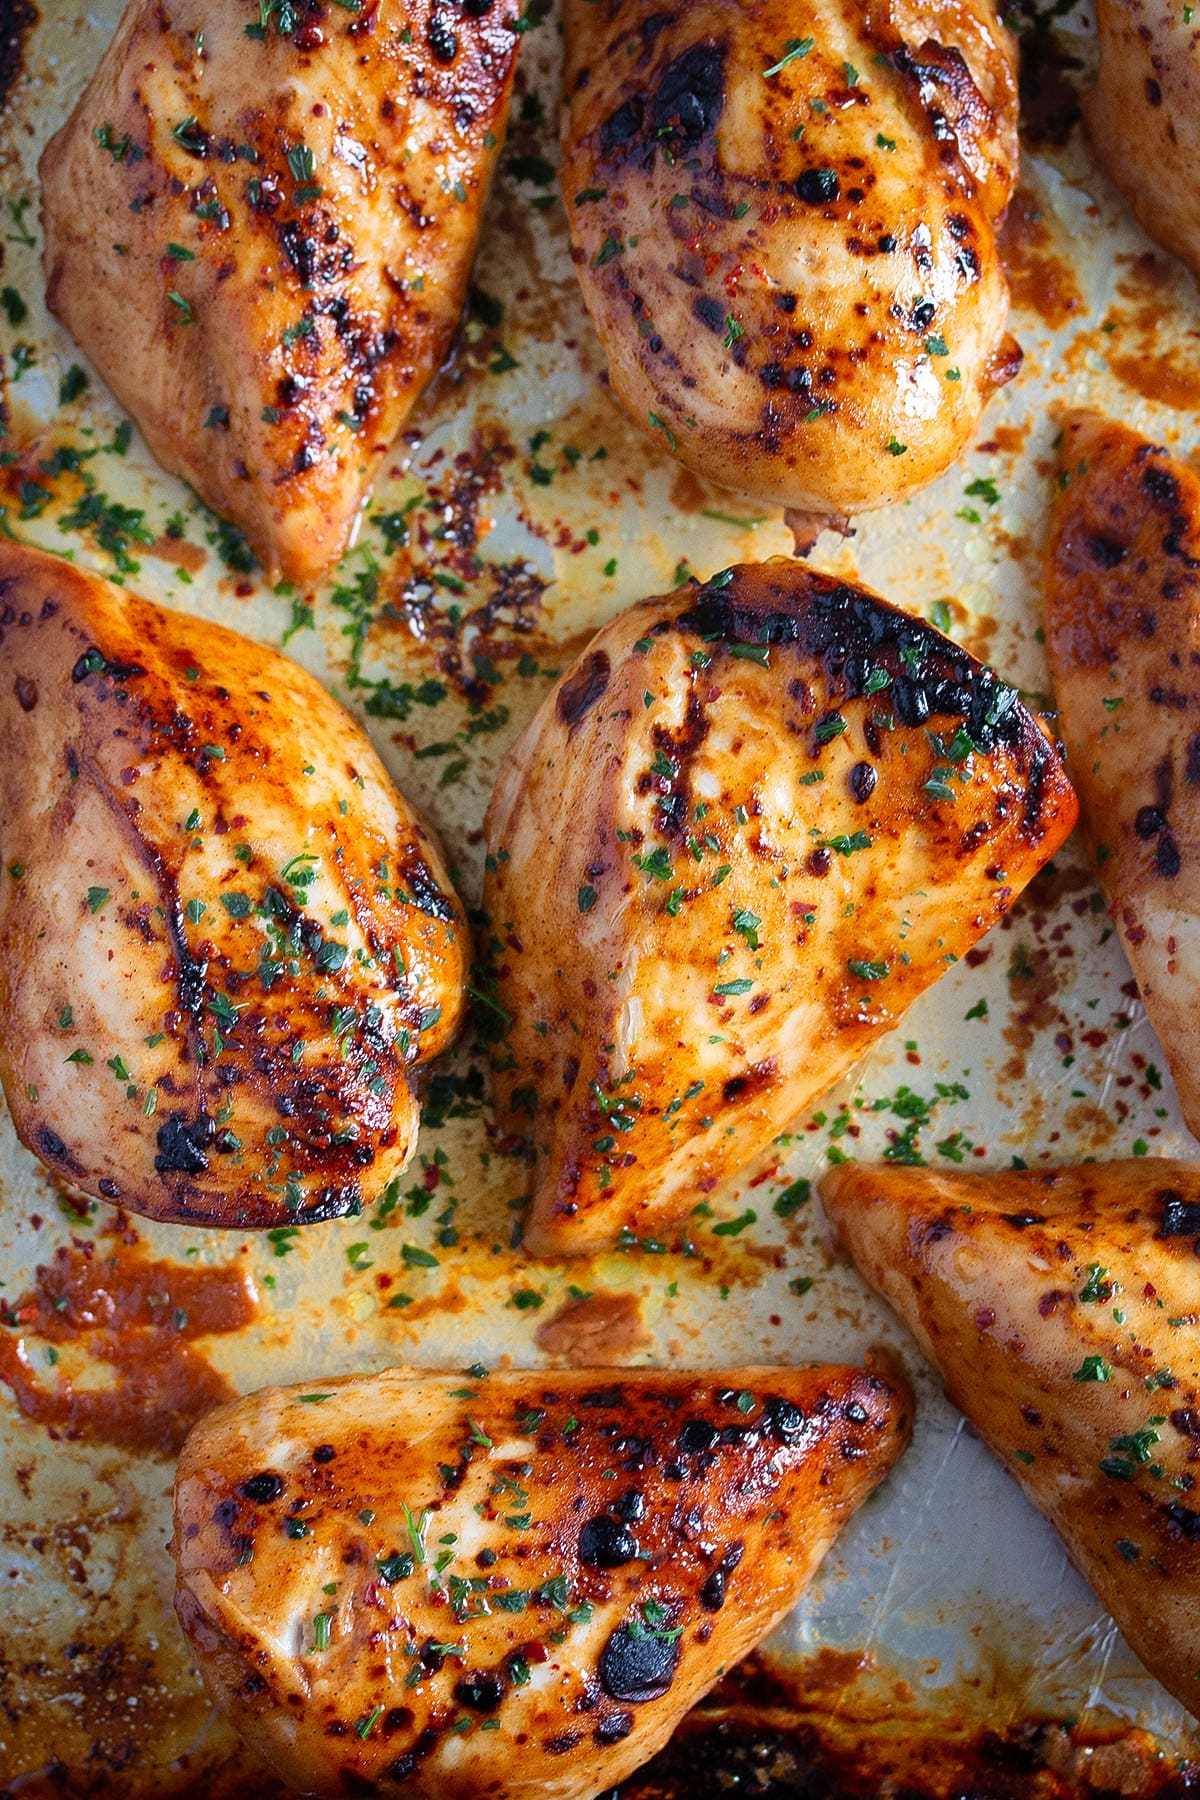 baked bbq chicken breast slightly charred and sprinkled with parsley.